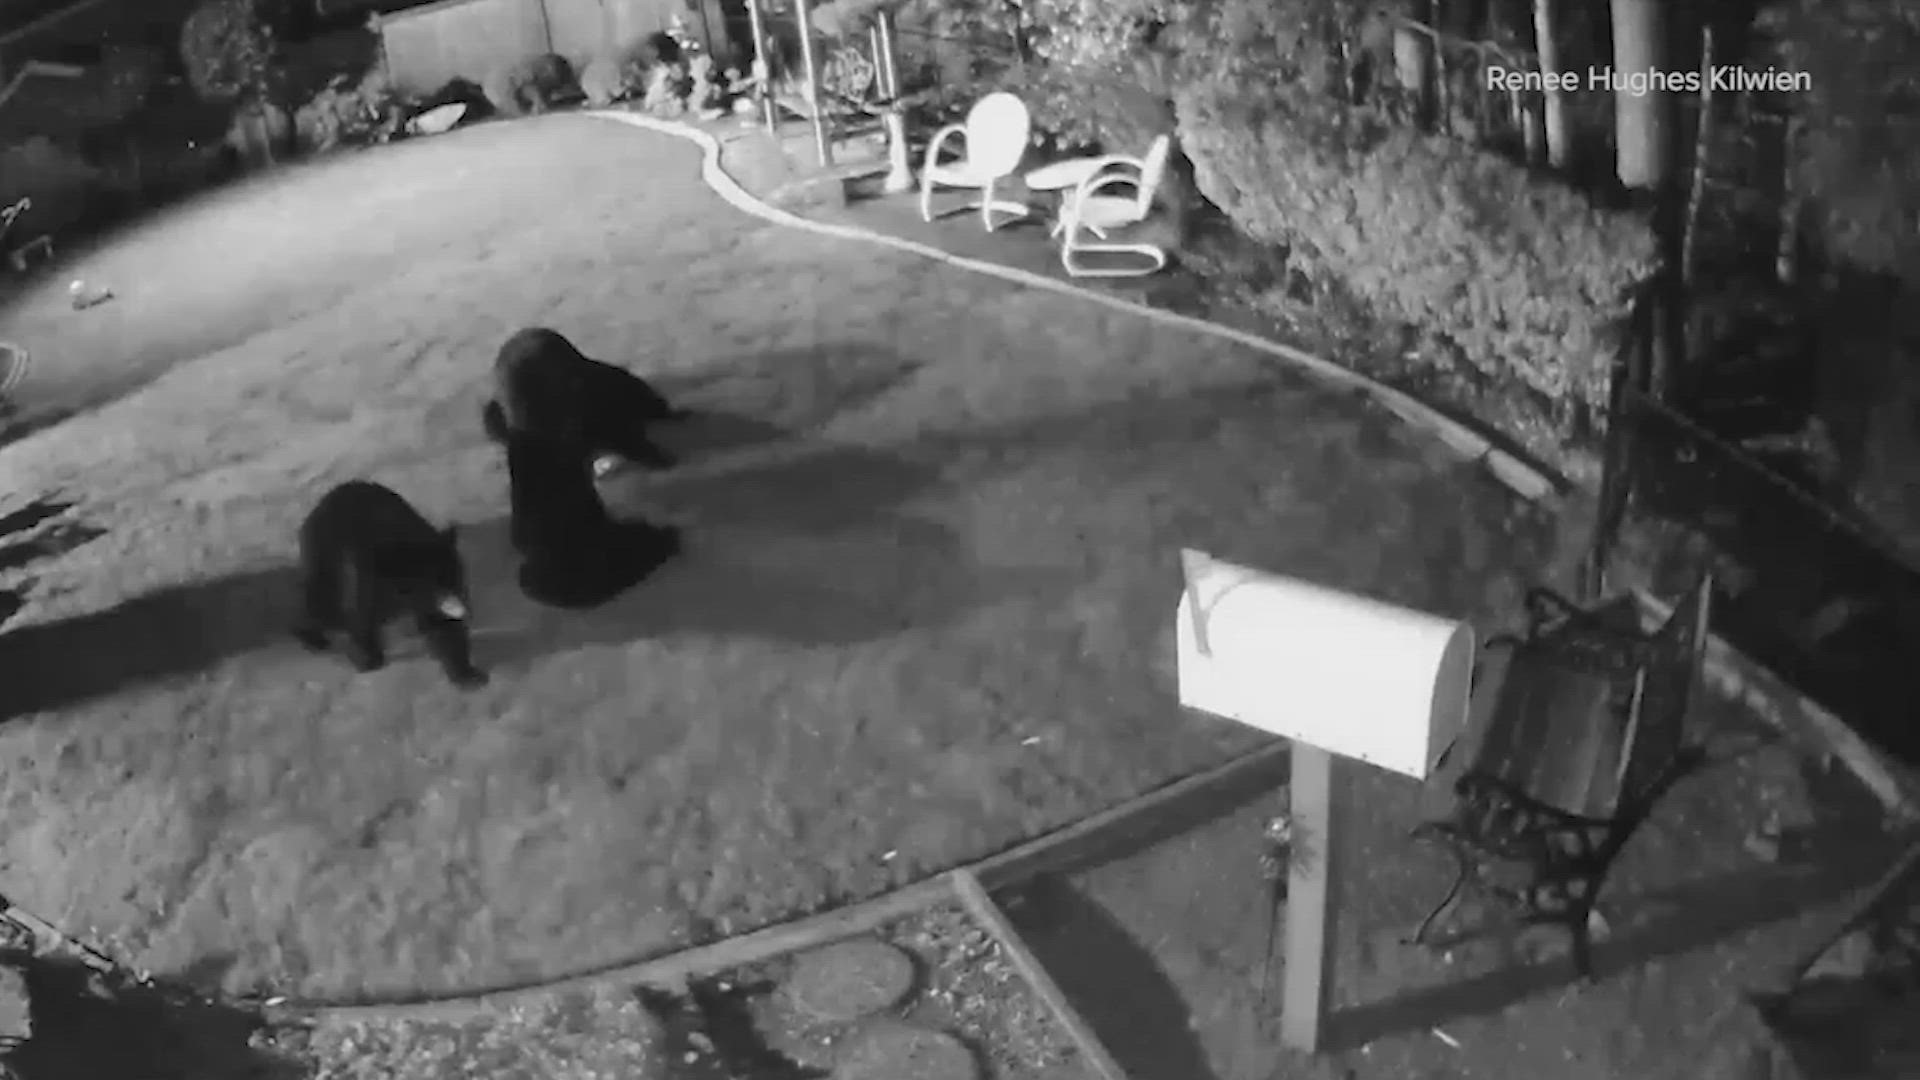 One KING 5 viewer had some surprise visitors Wednesday night when a family of black bears spent some time in her yard in Bothell